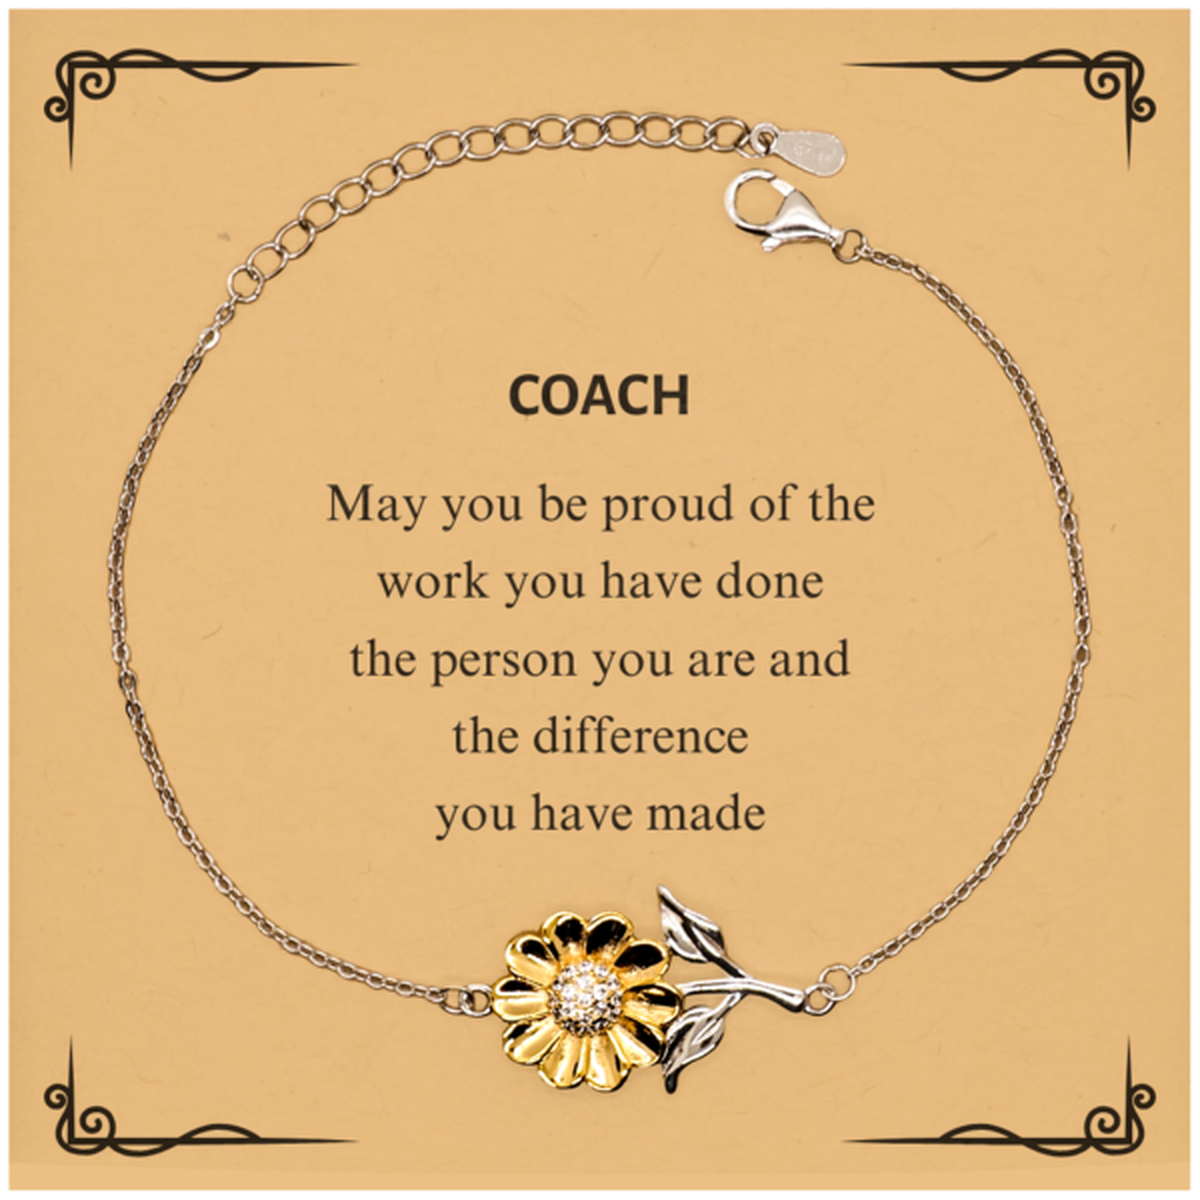 Coach May you be proud of the work you have done, Retirement Coach Sunflower Bracelet for Colleague Appreciation Gifts Amazing for Coach